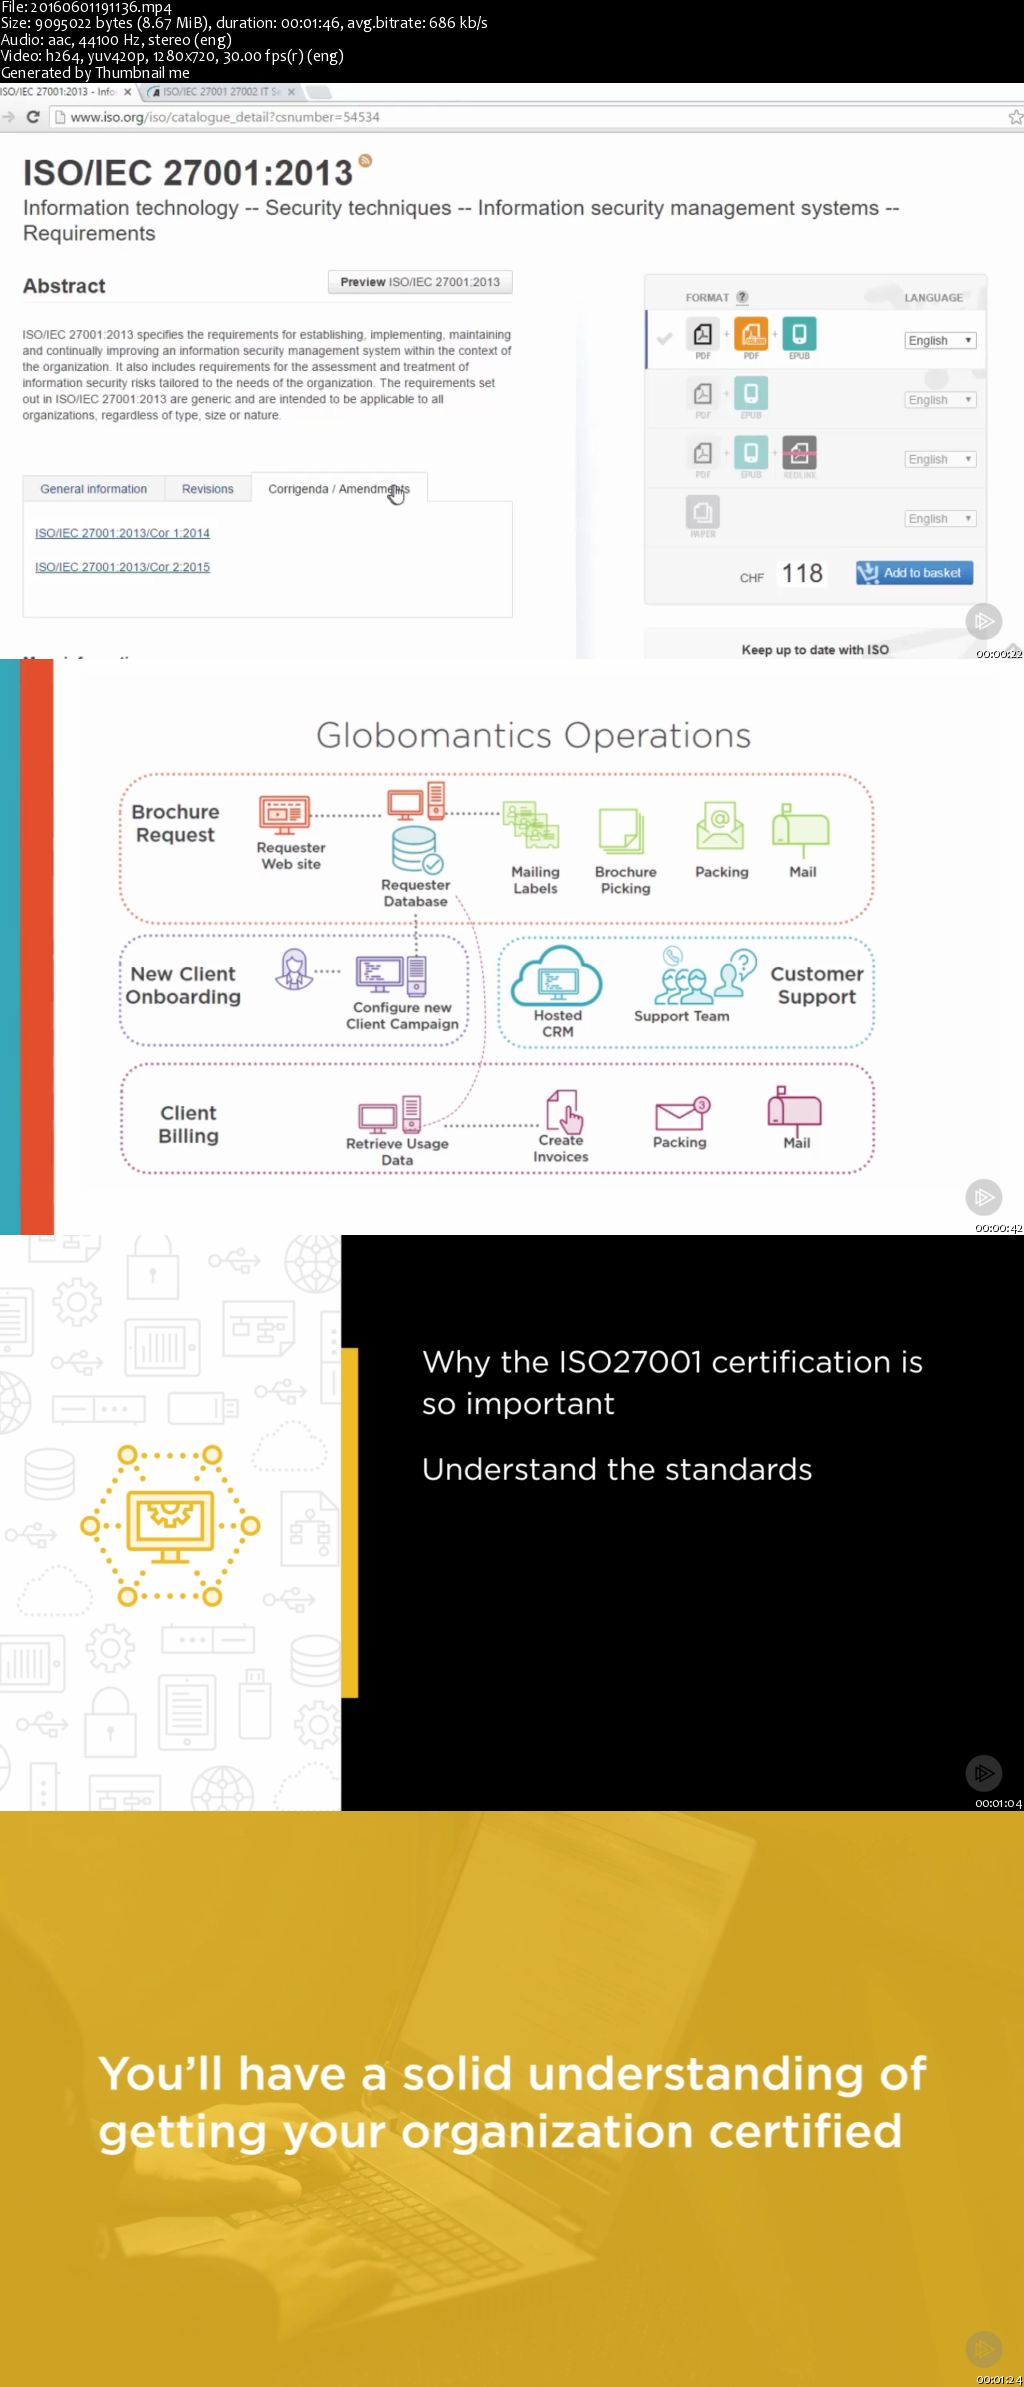 ISO/IEC 27001 Information Security: The Big Picture